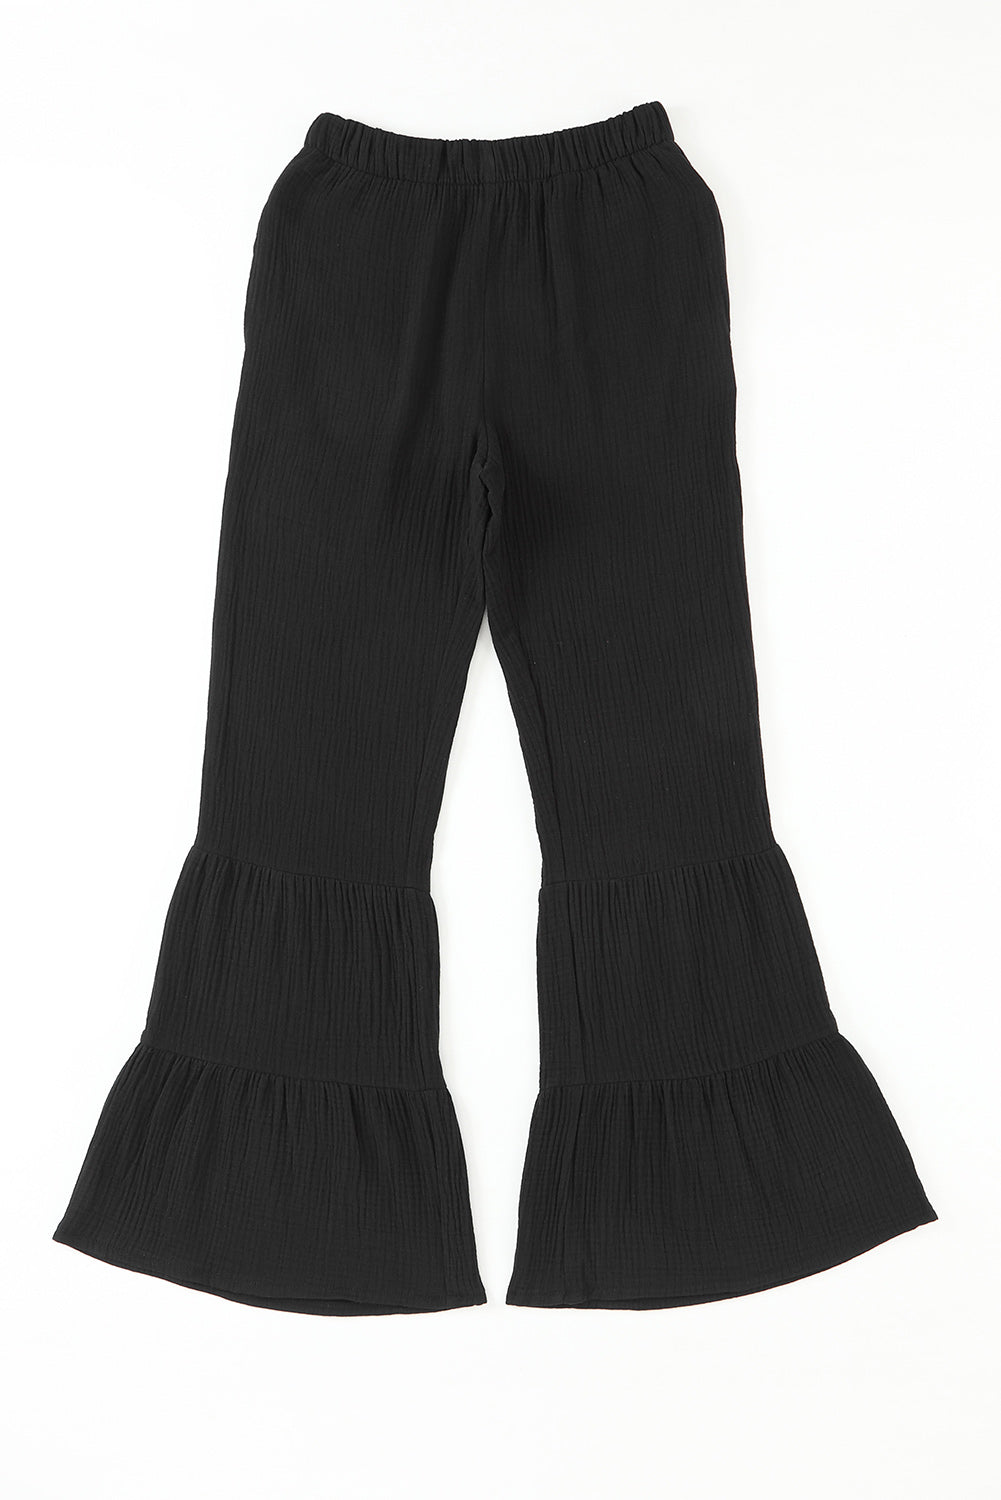 Long Flare Pants with Pocket - Online Only